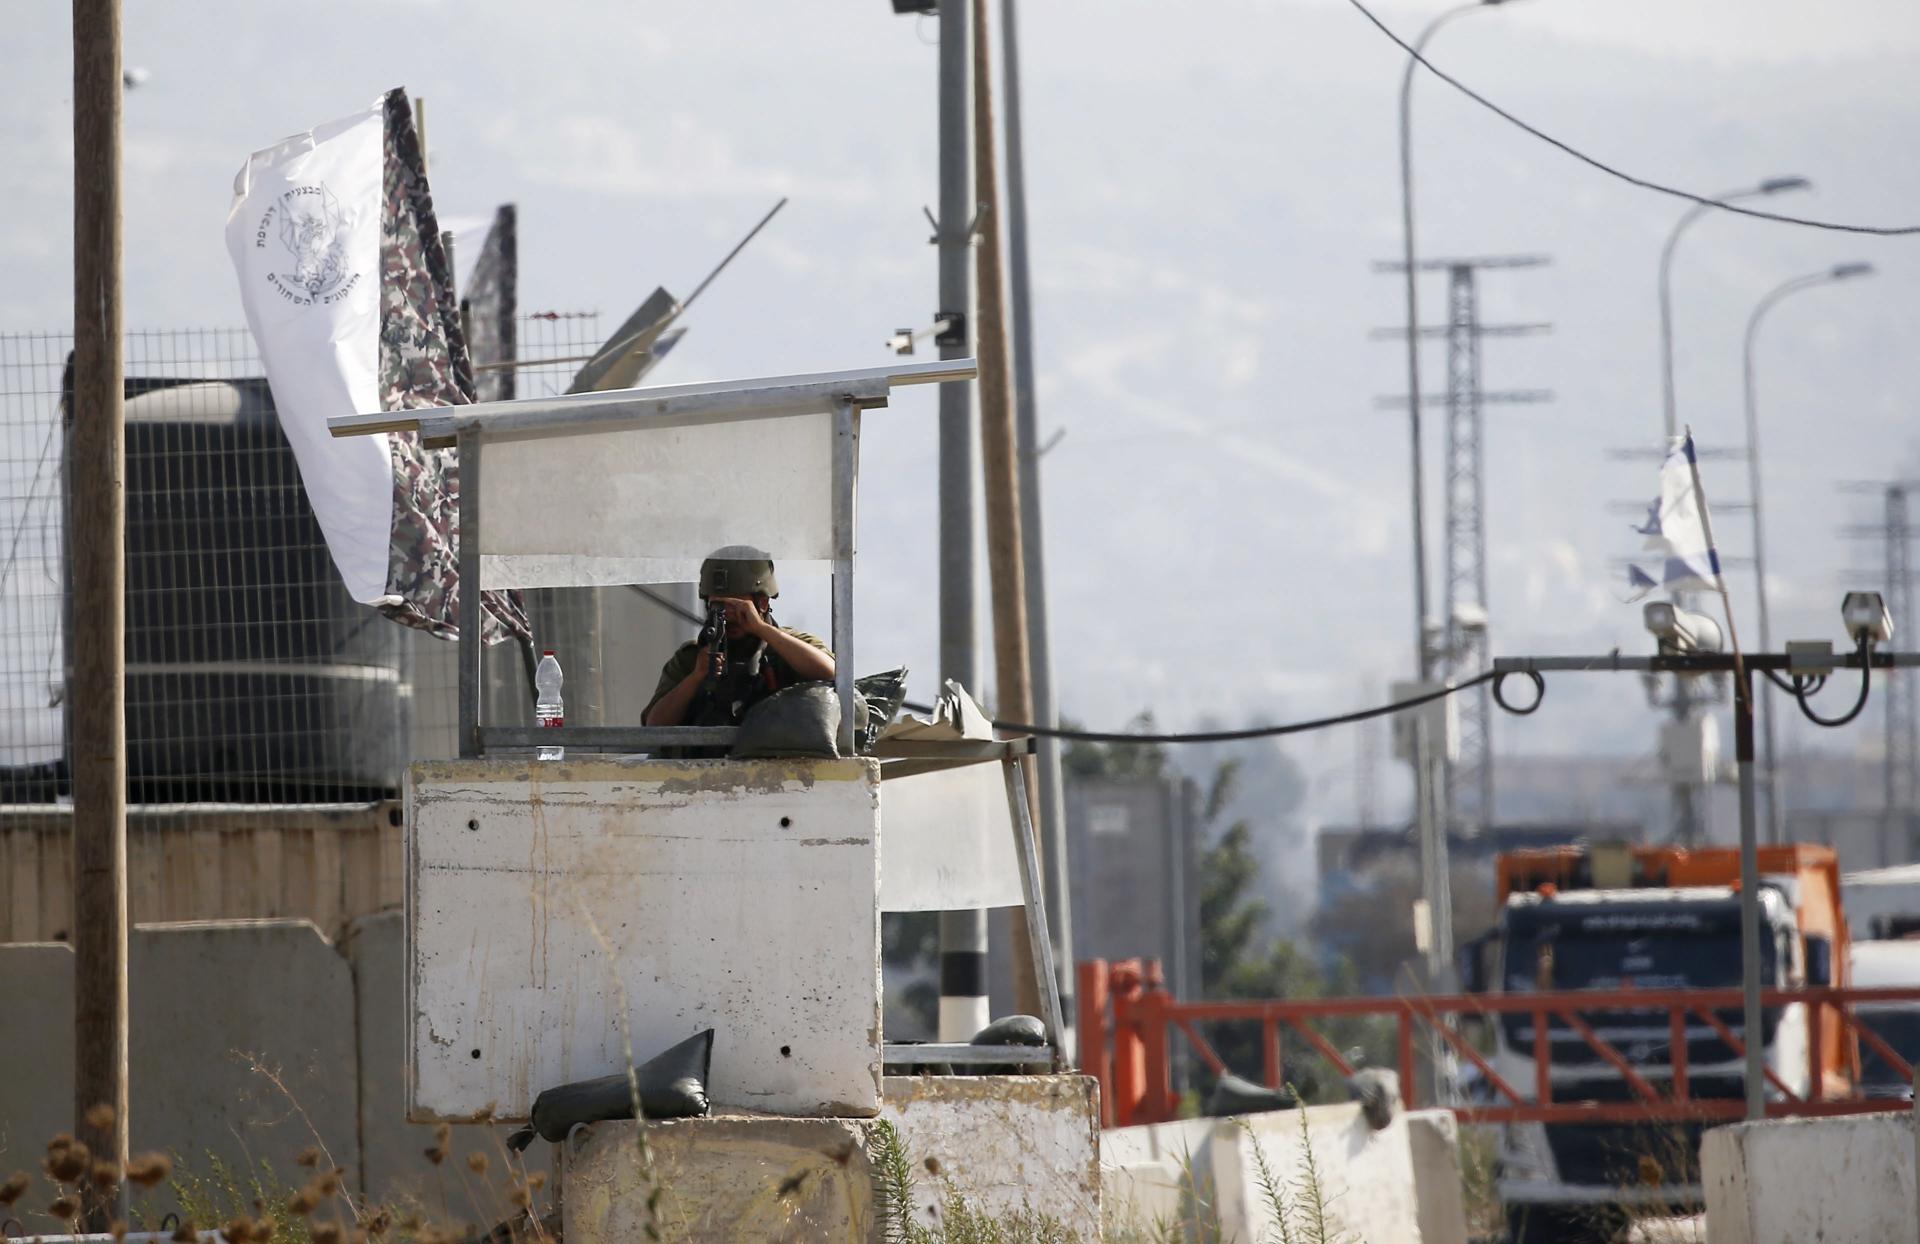 Security is increased at the Huwara checkpoint near Nablus, West Bank, 19 August 2023, which is closed by Israeli army after two Israelis were killed at Huwara village near Nablus. EFE/EPA/ALAA BADARNEH